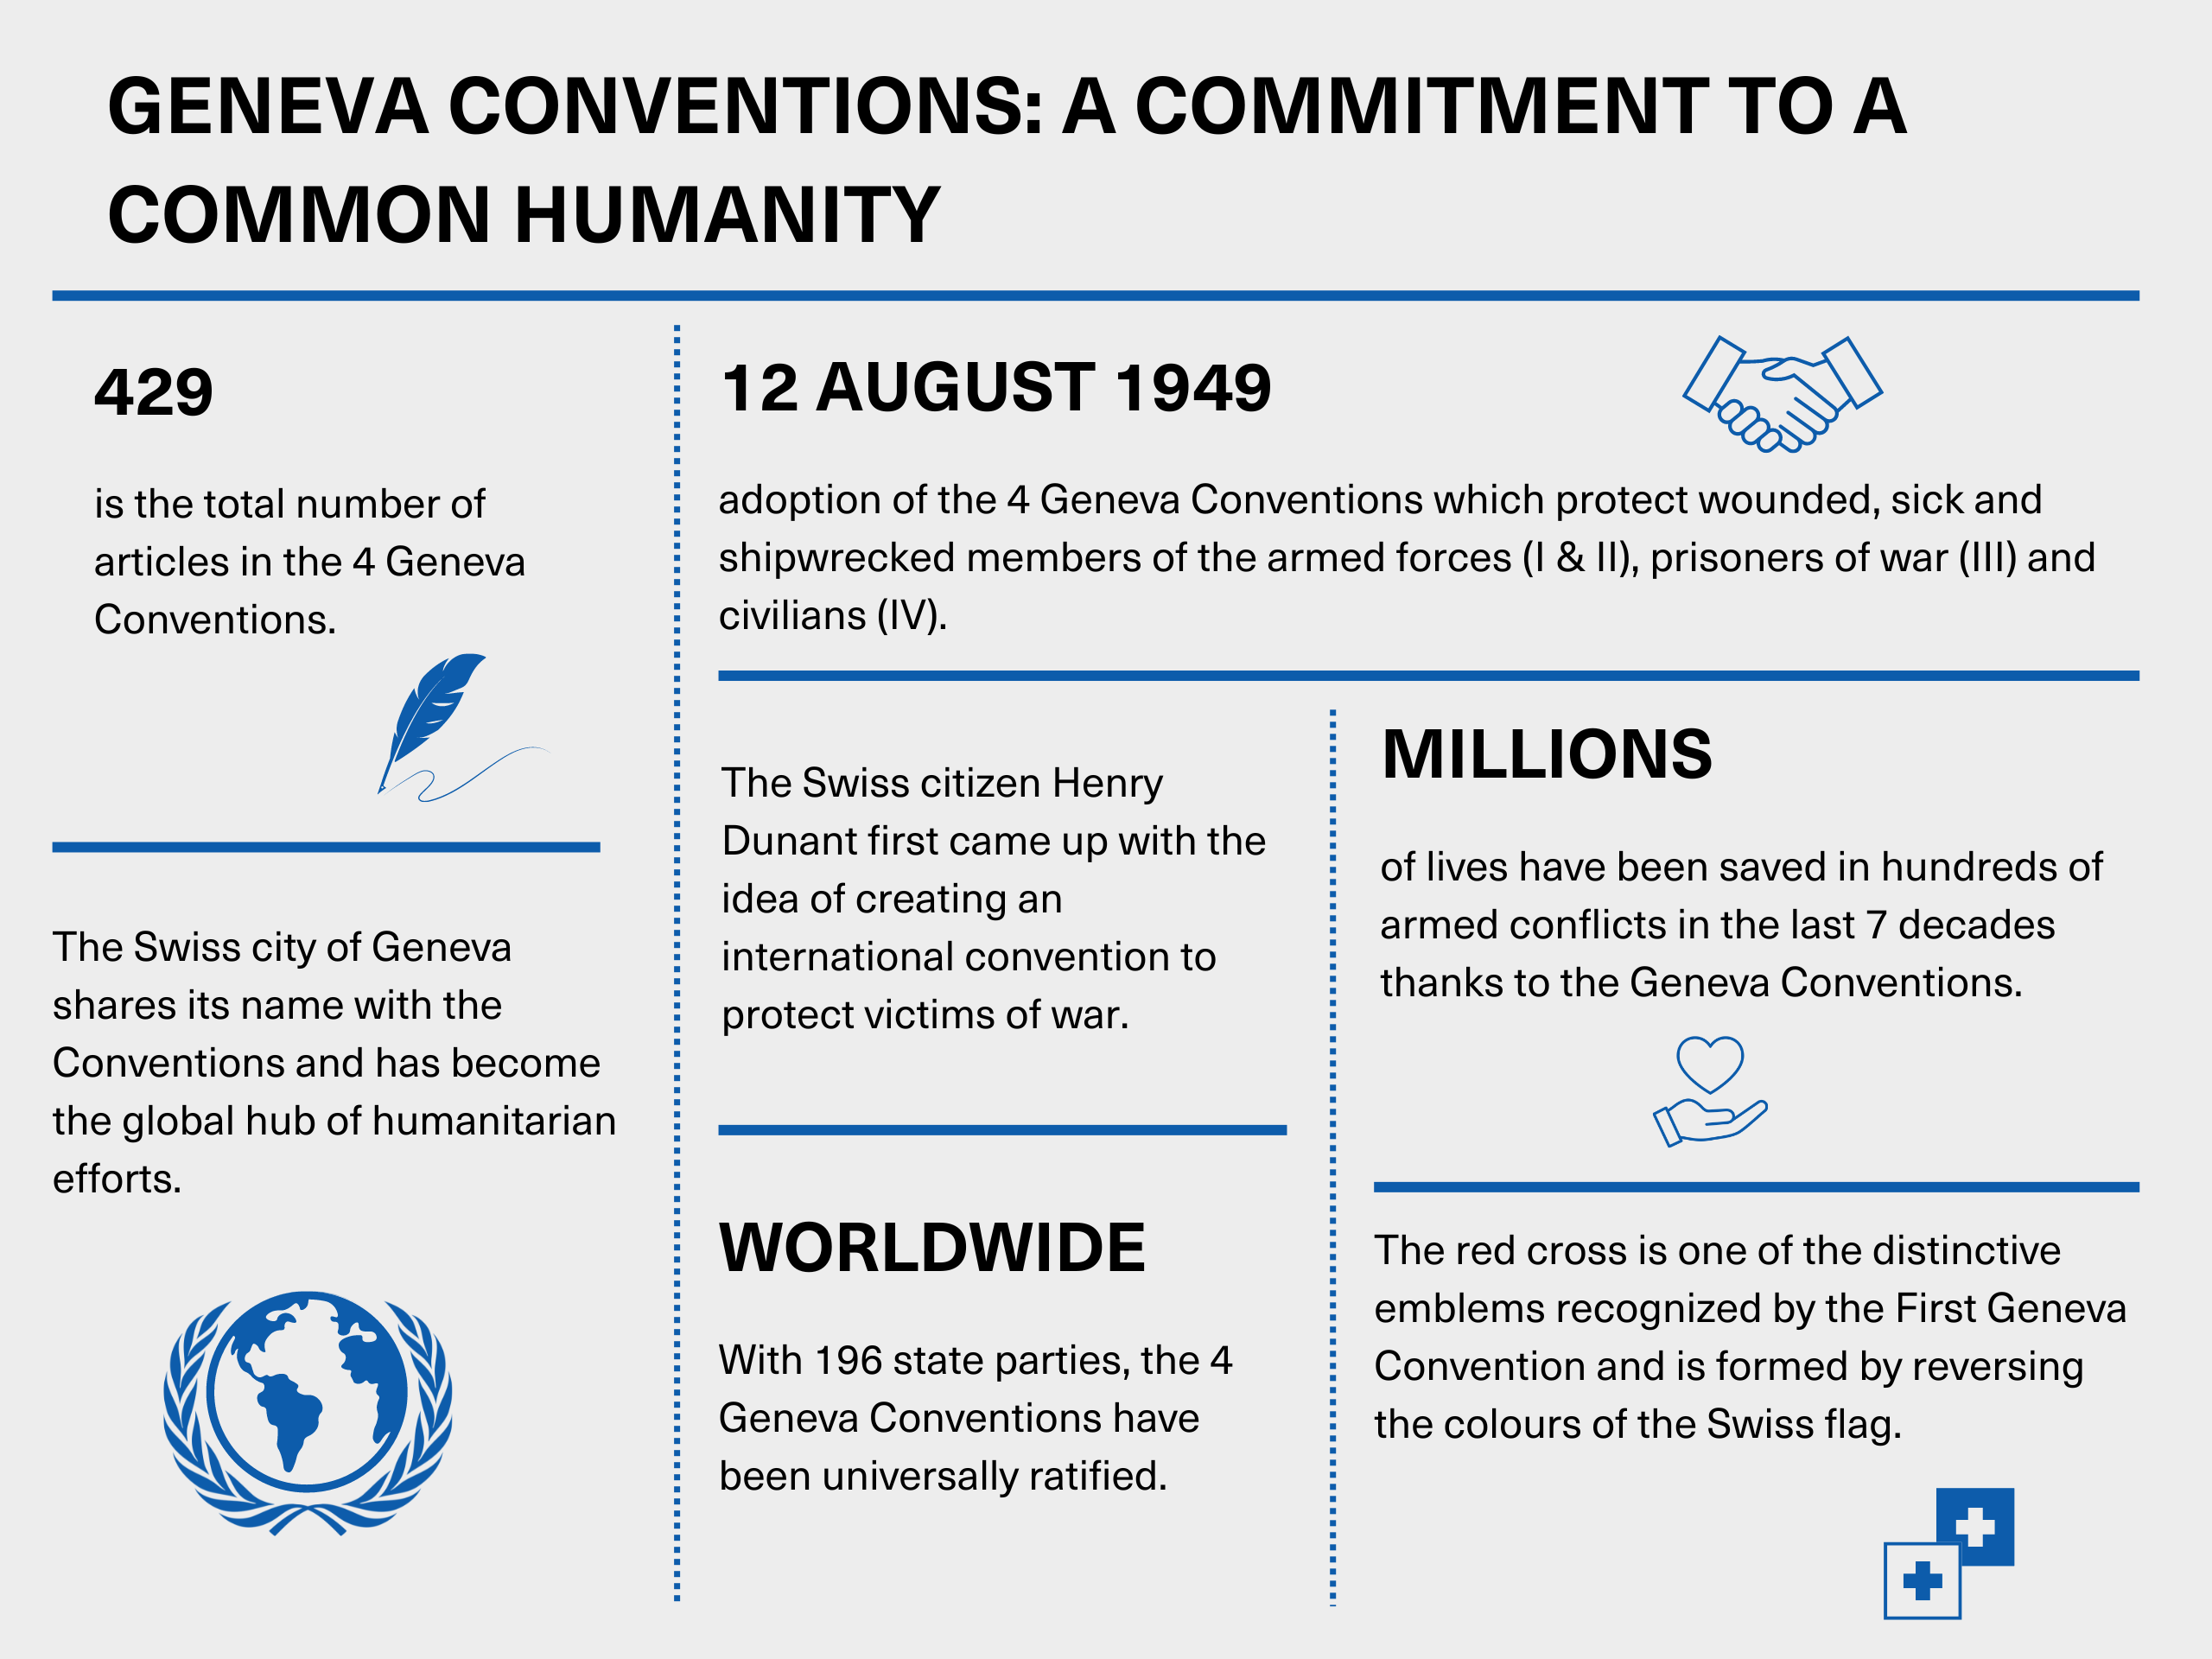 An infographic outlining the history and important factual information about the Geneva Conventions on the eve of their 75th anniversary.